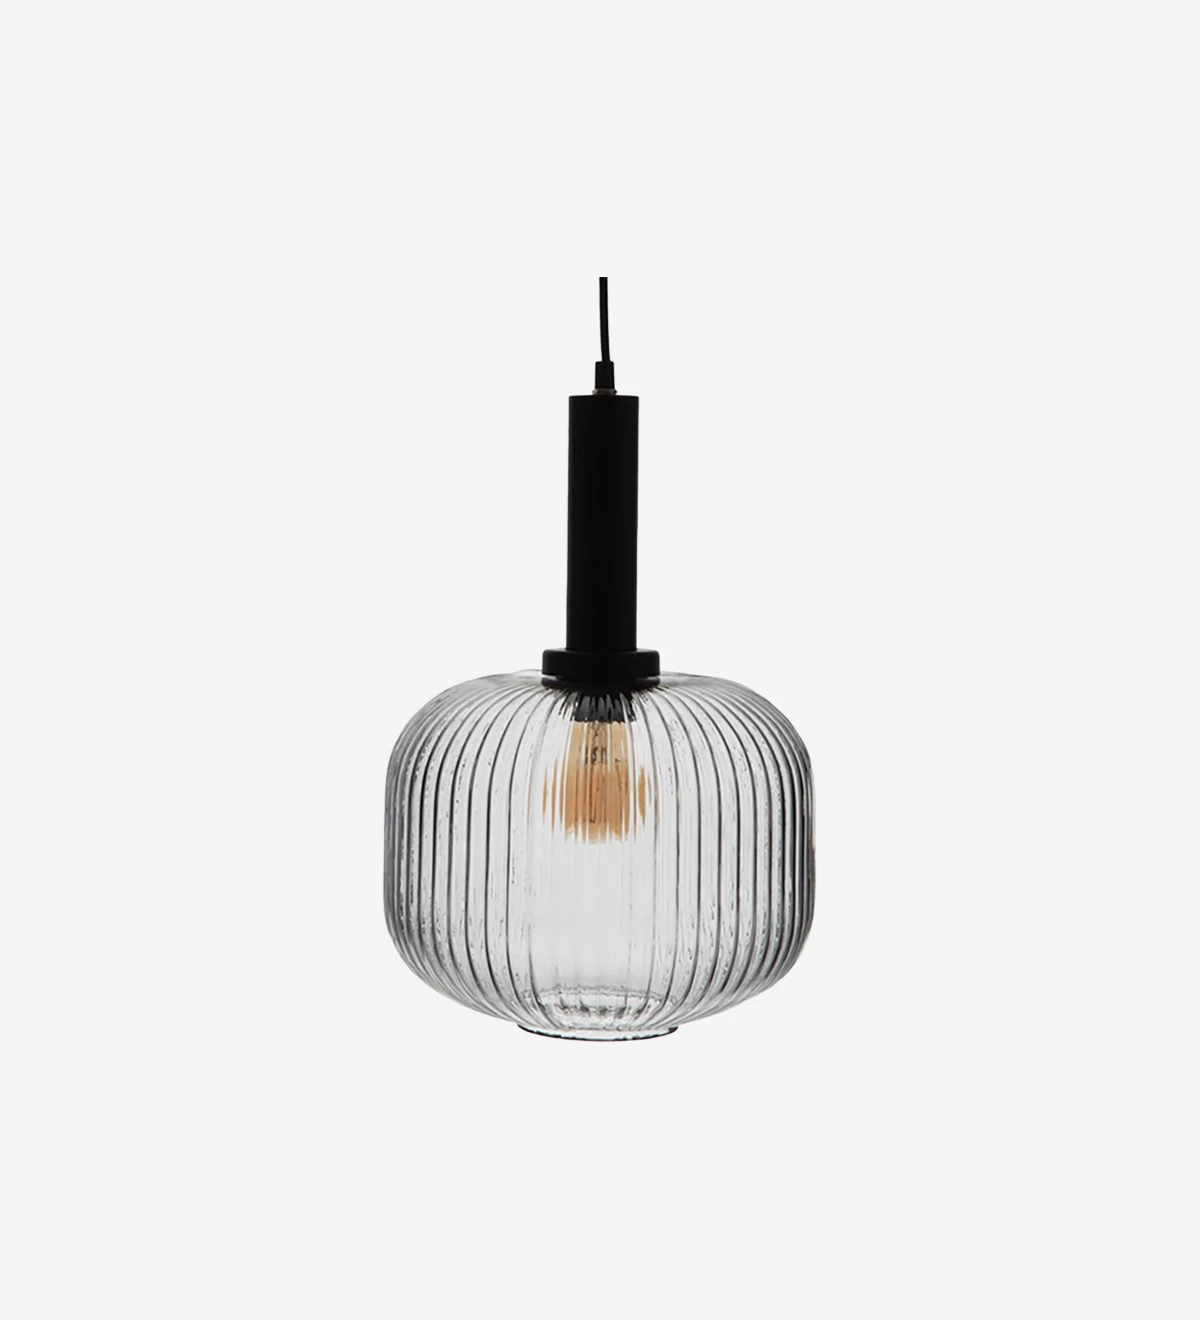  Suspension lamp in black metal with clear glass shade.